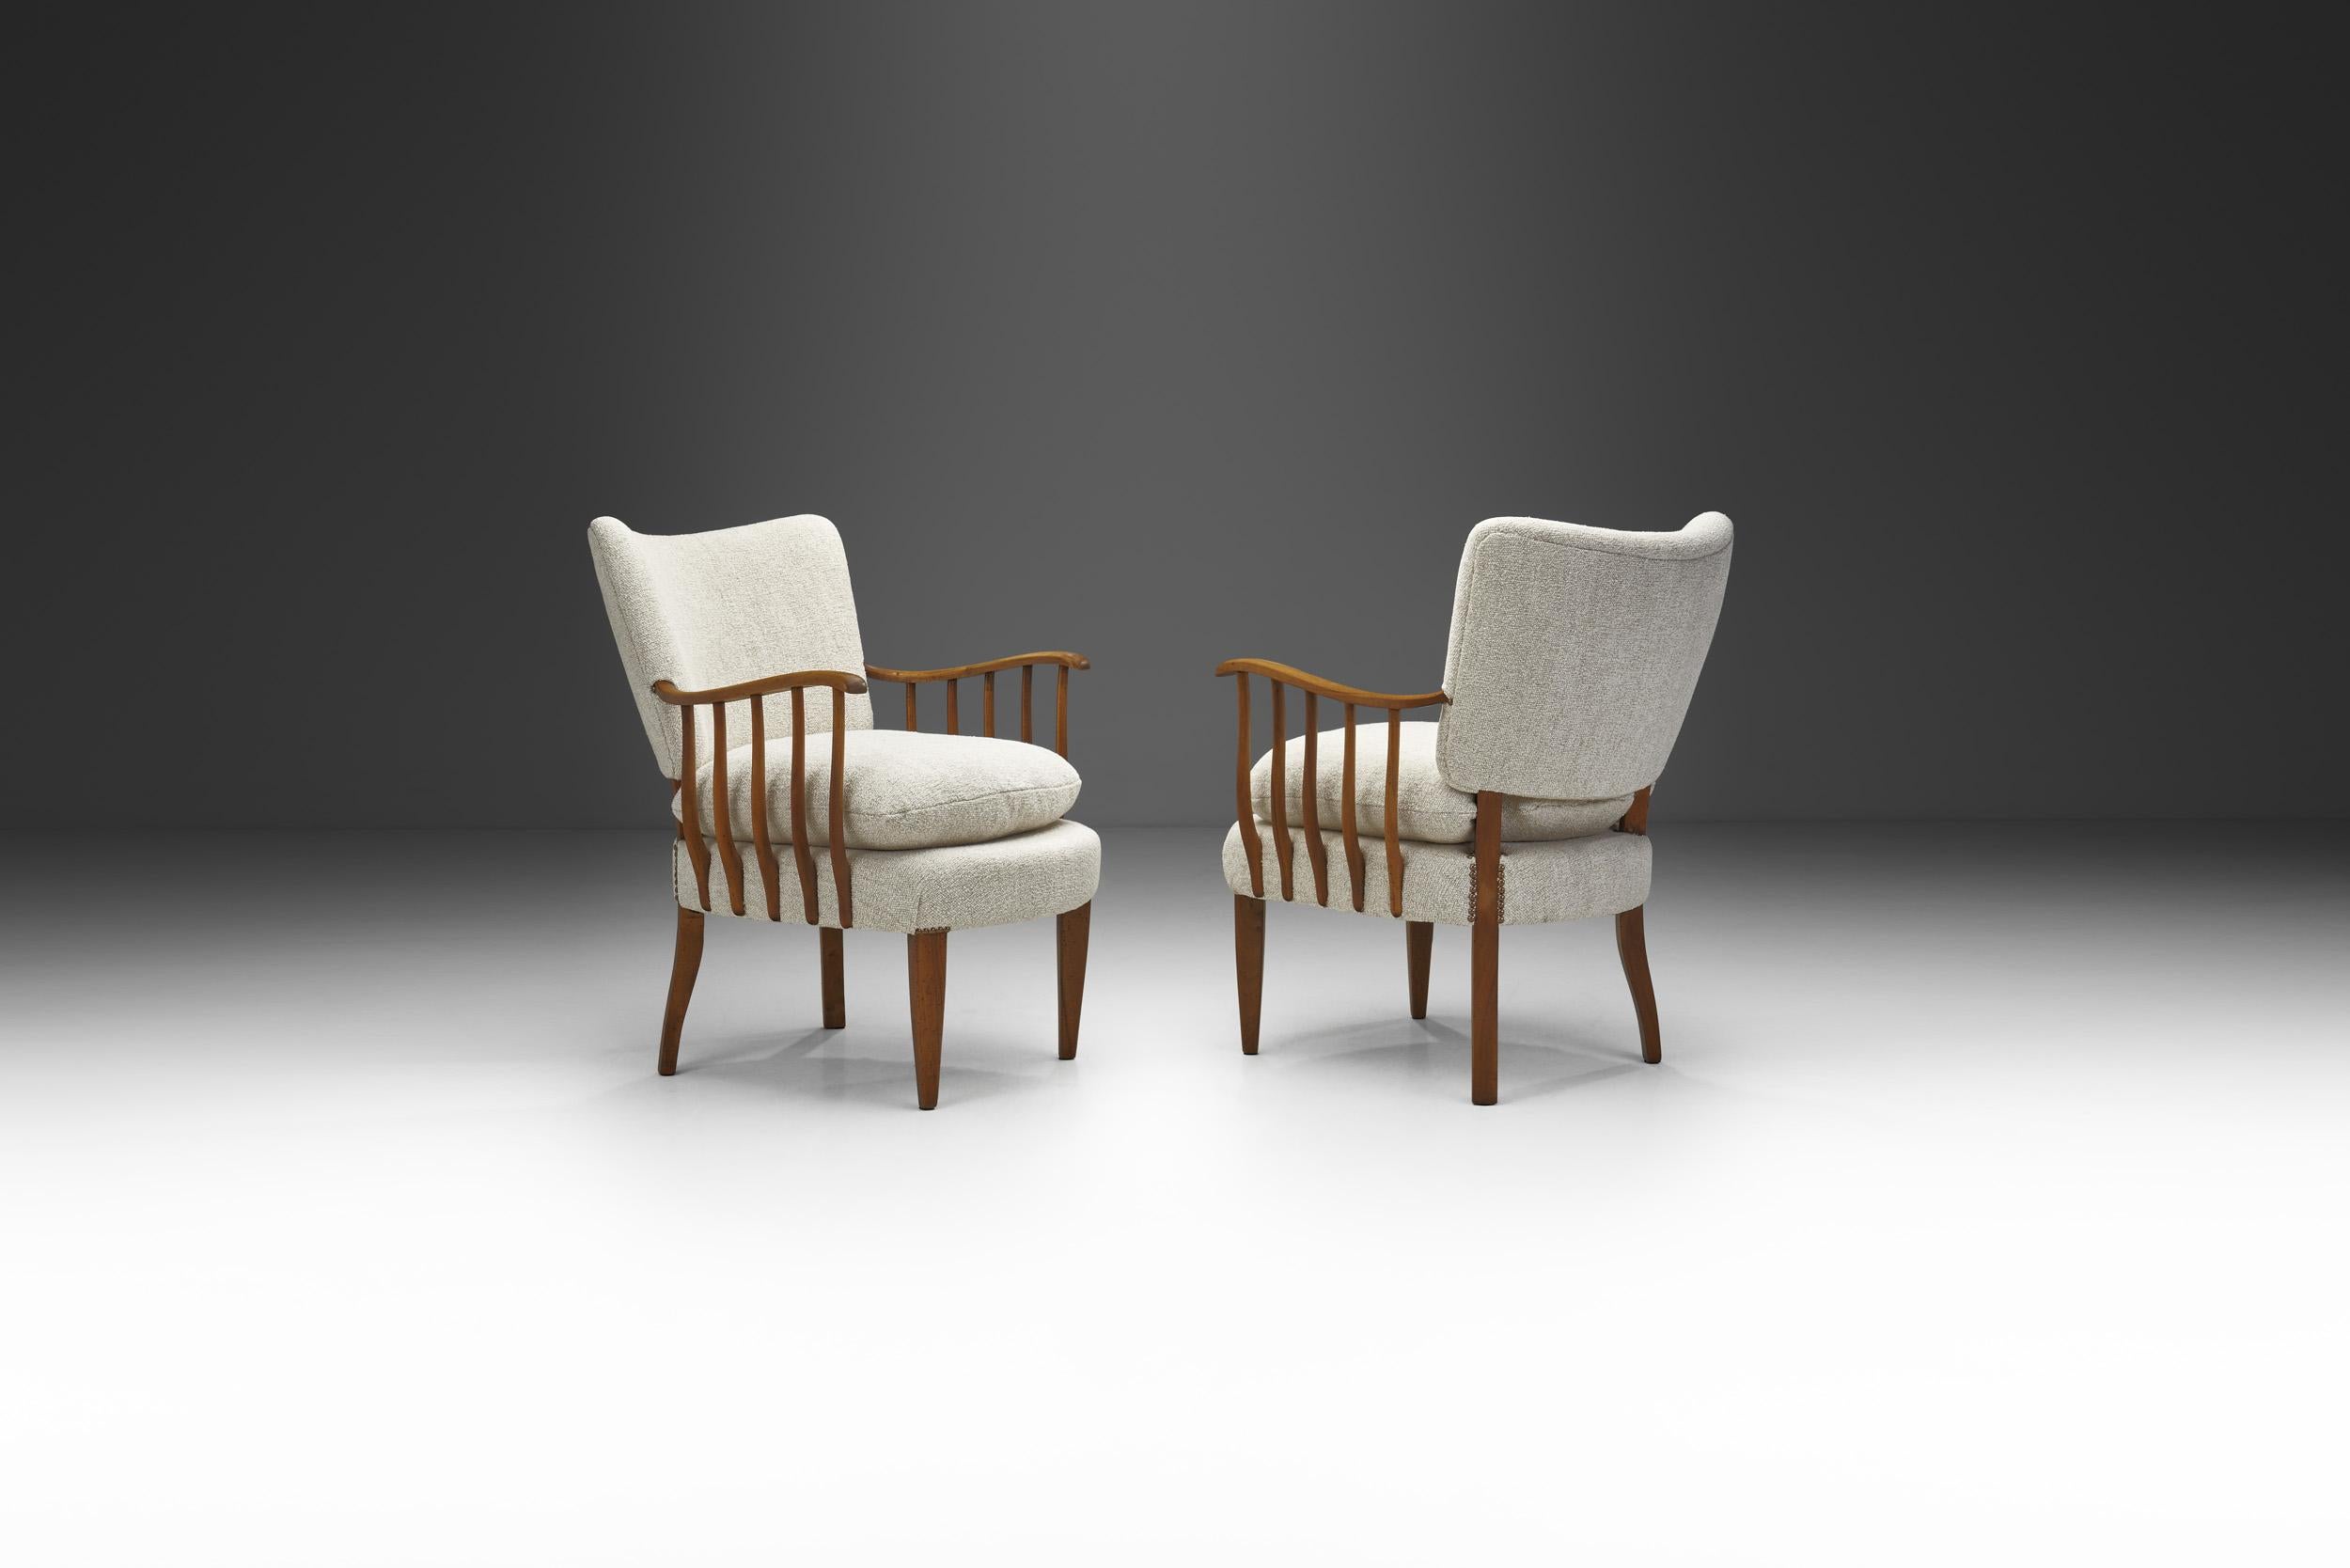 Like this pair of sculptural armchairs, European cabinetmakers’ seating creations are generally characterized by clarity in design and extremely high quality craftsmanship and choice of materials.

Designers in the post-war period focused on